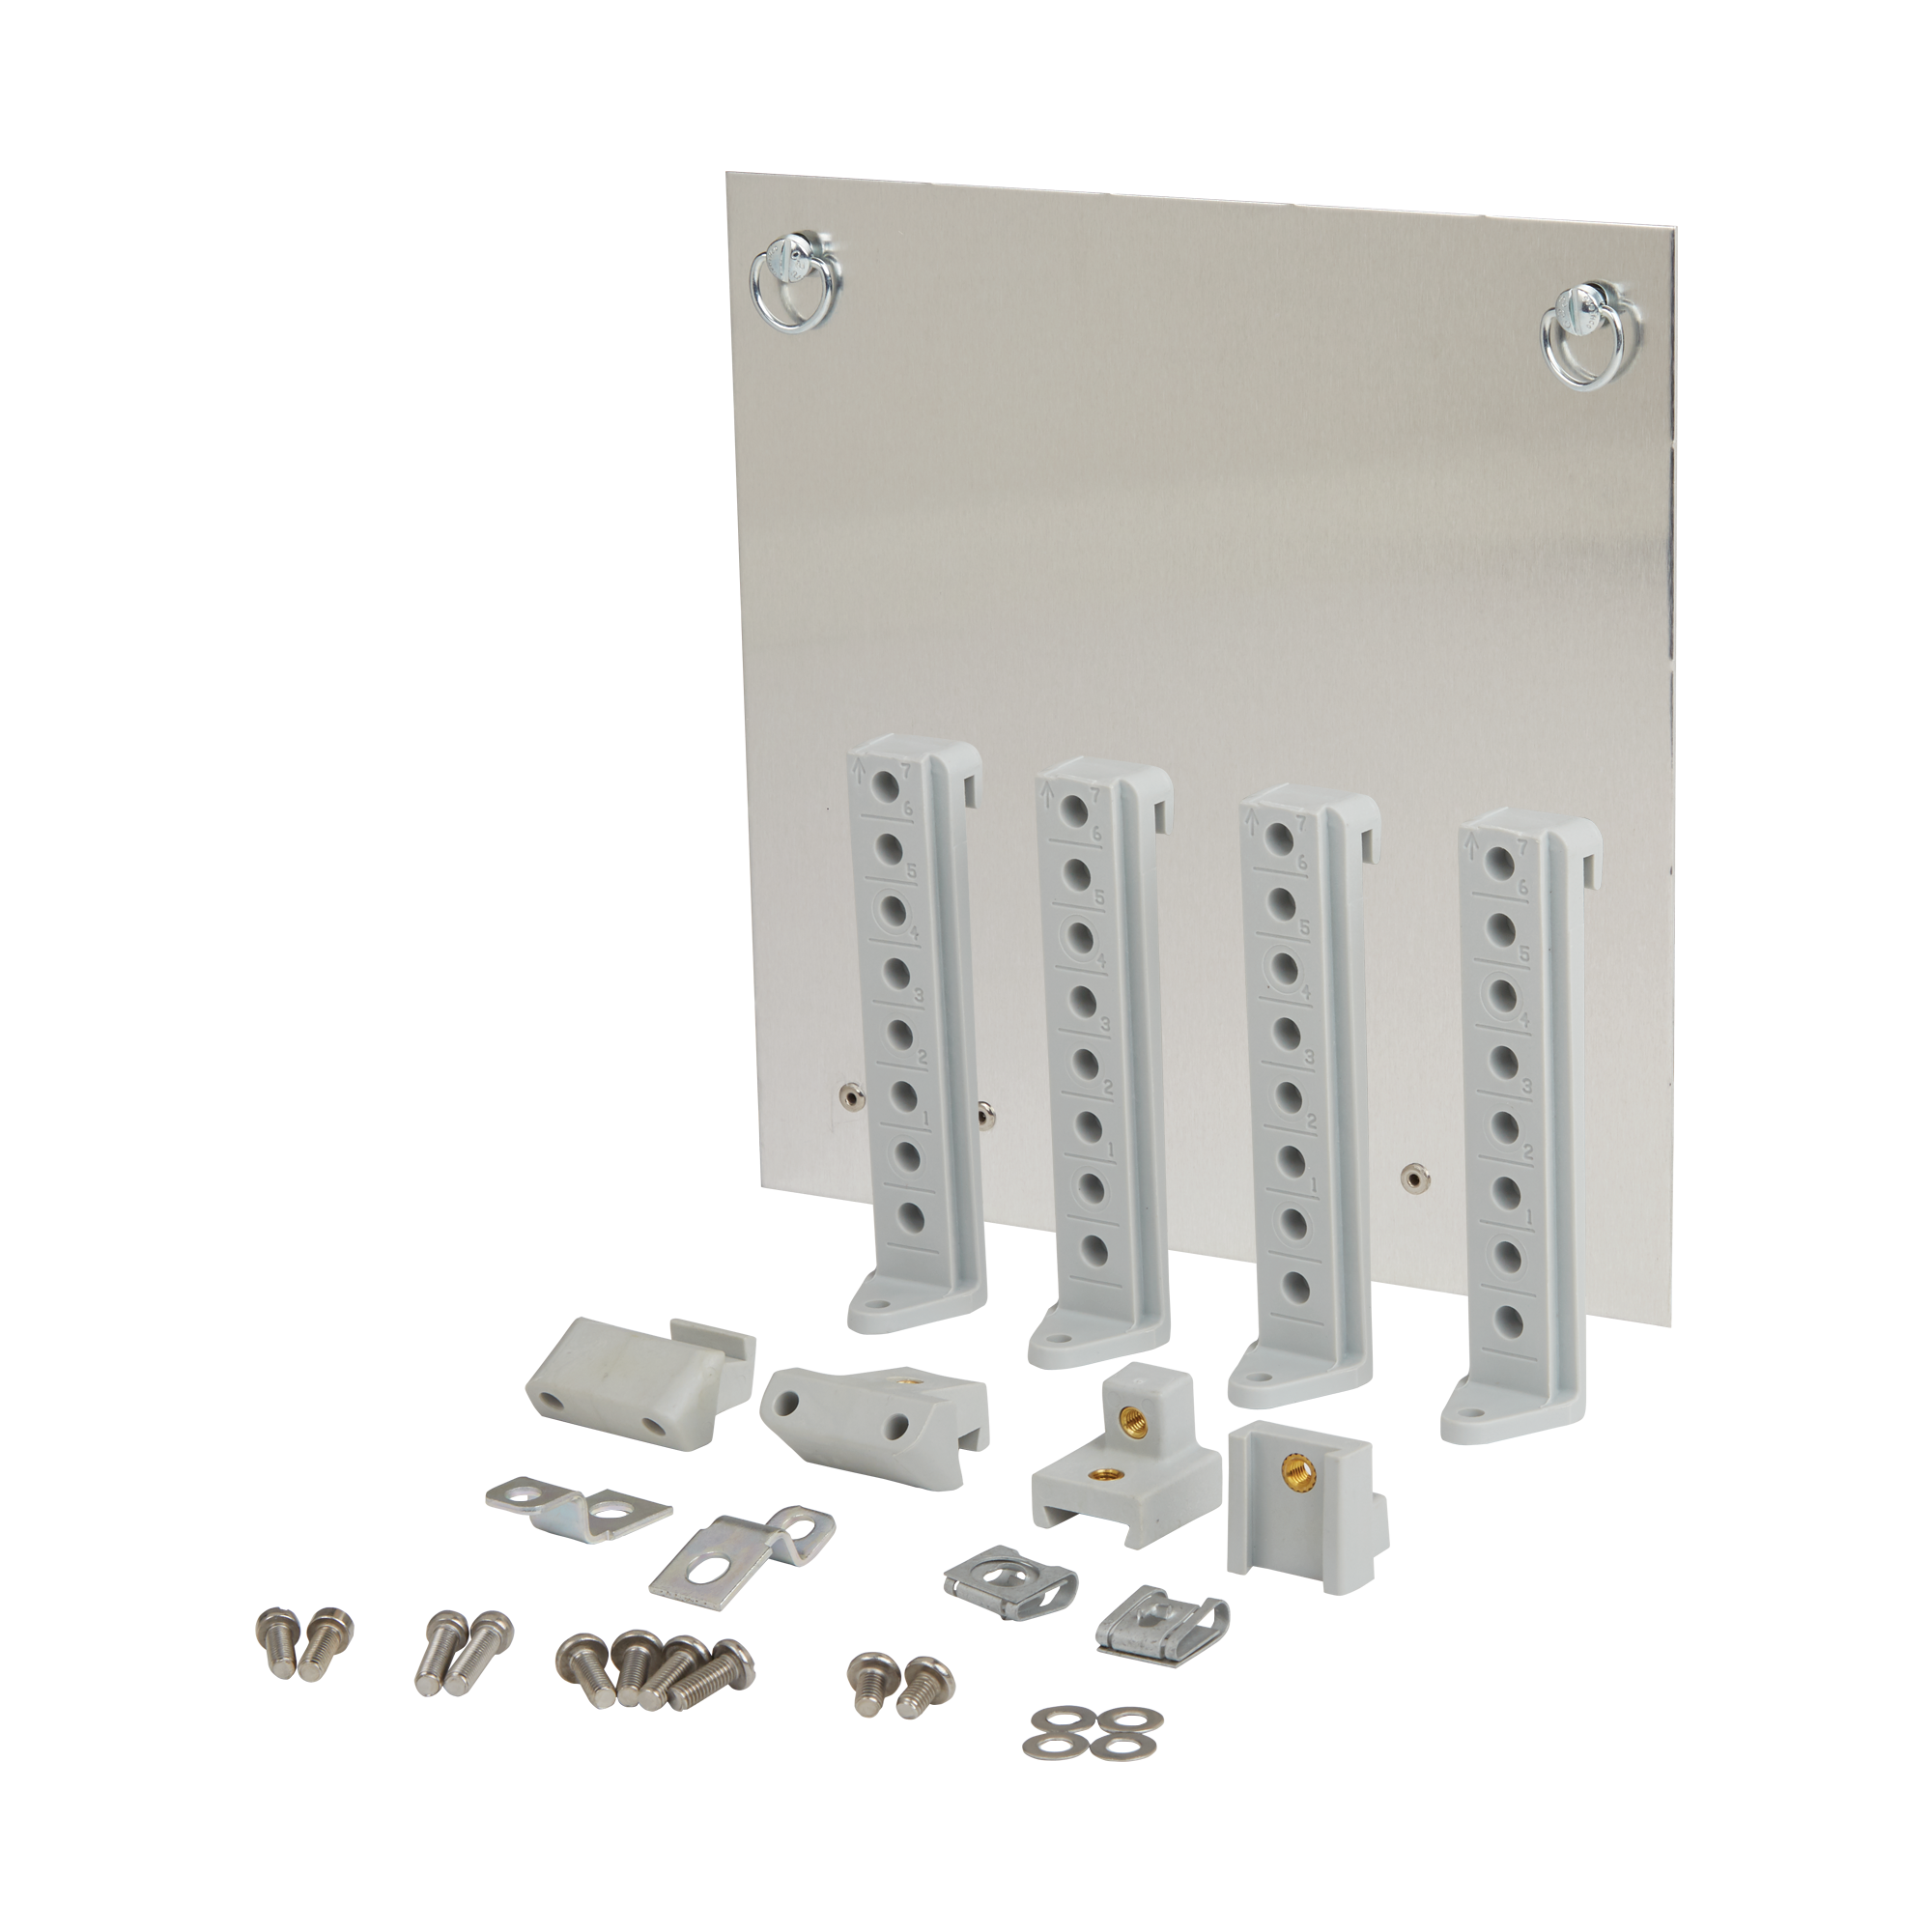 8X6 Adjustable Swingout Panel And Accessoty Kit